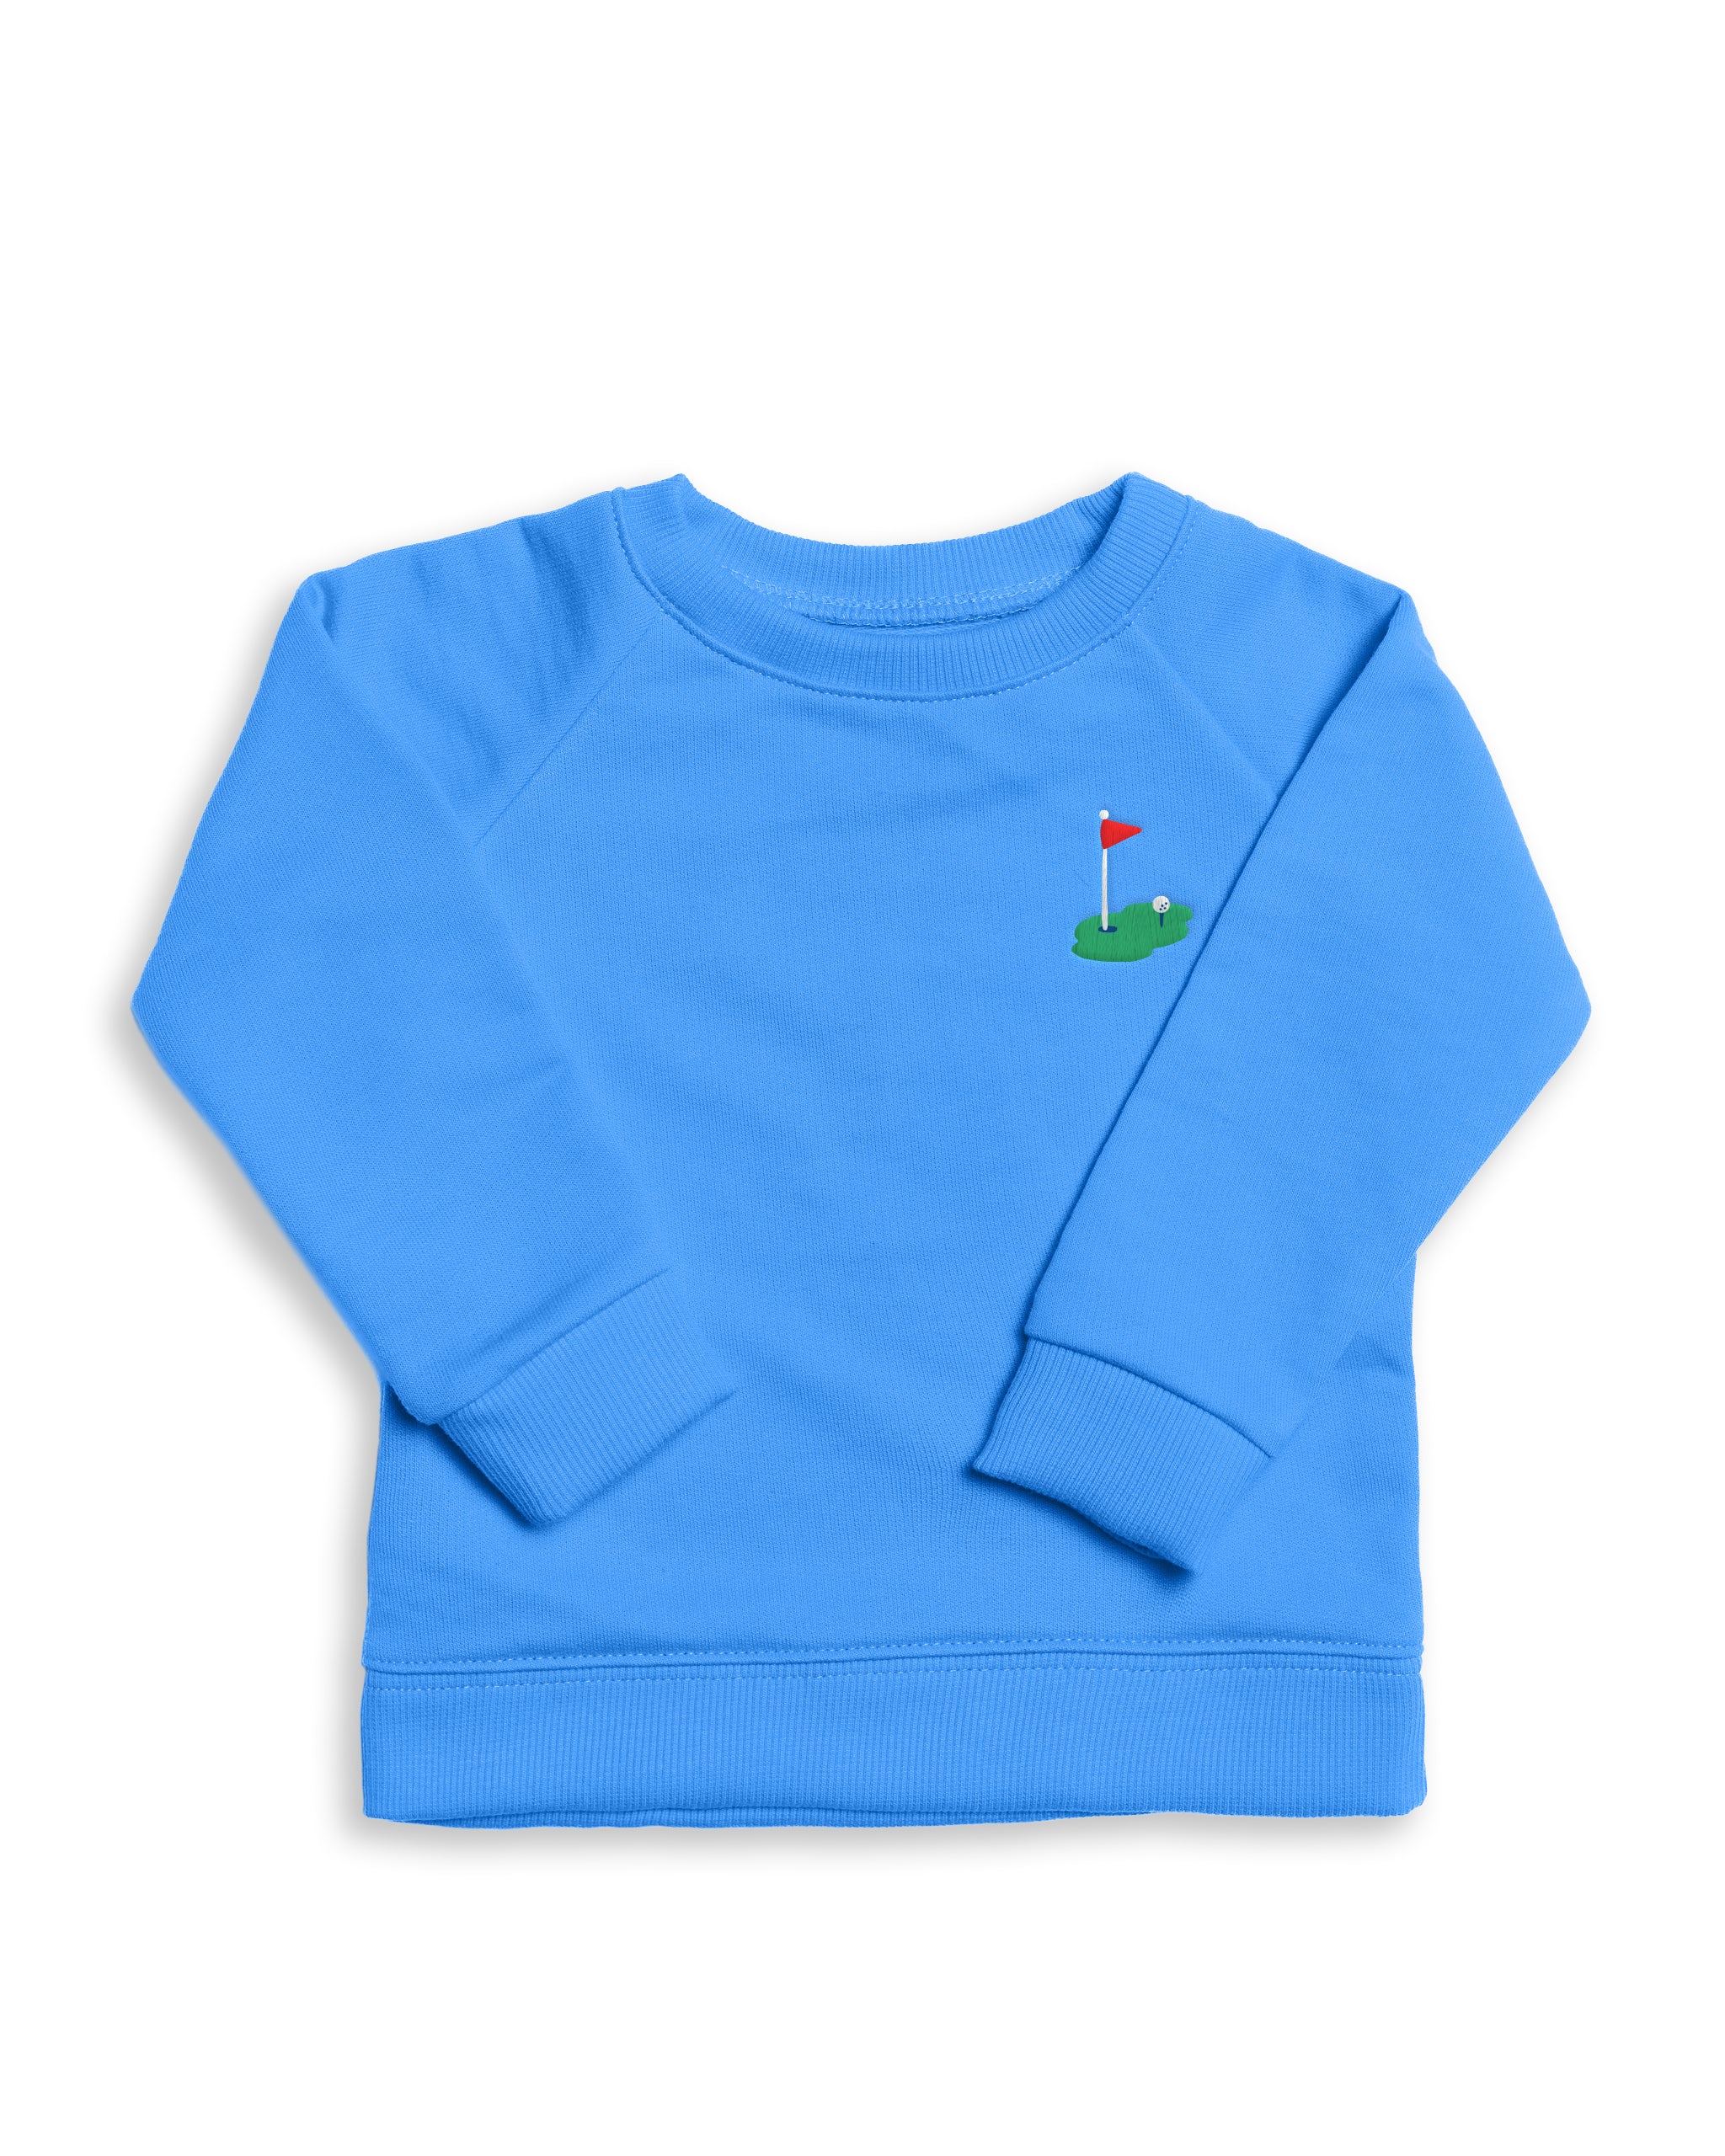 The Organic Embroidered Pullover Sweatshirt #color_Marine Blue Golf